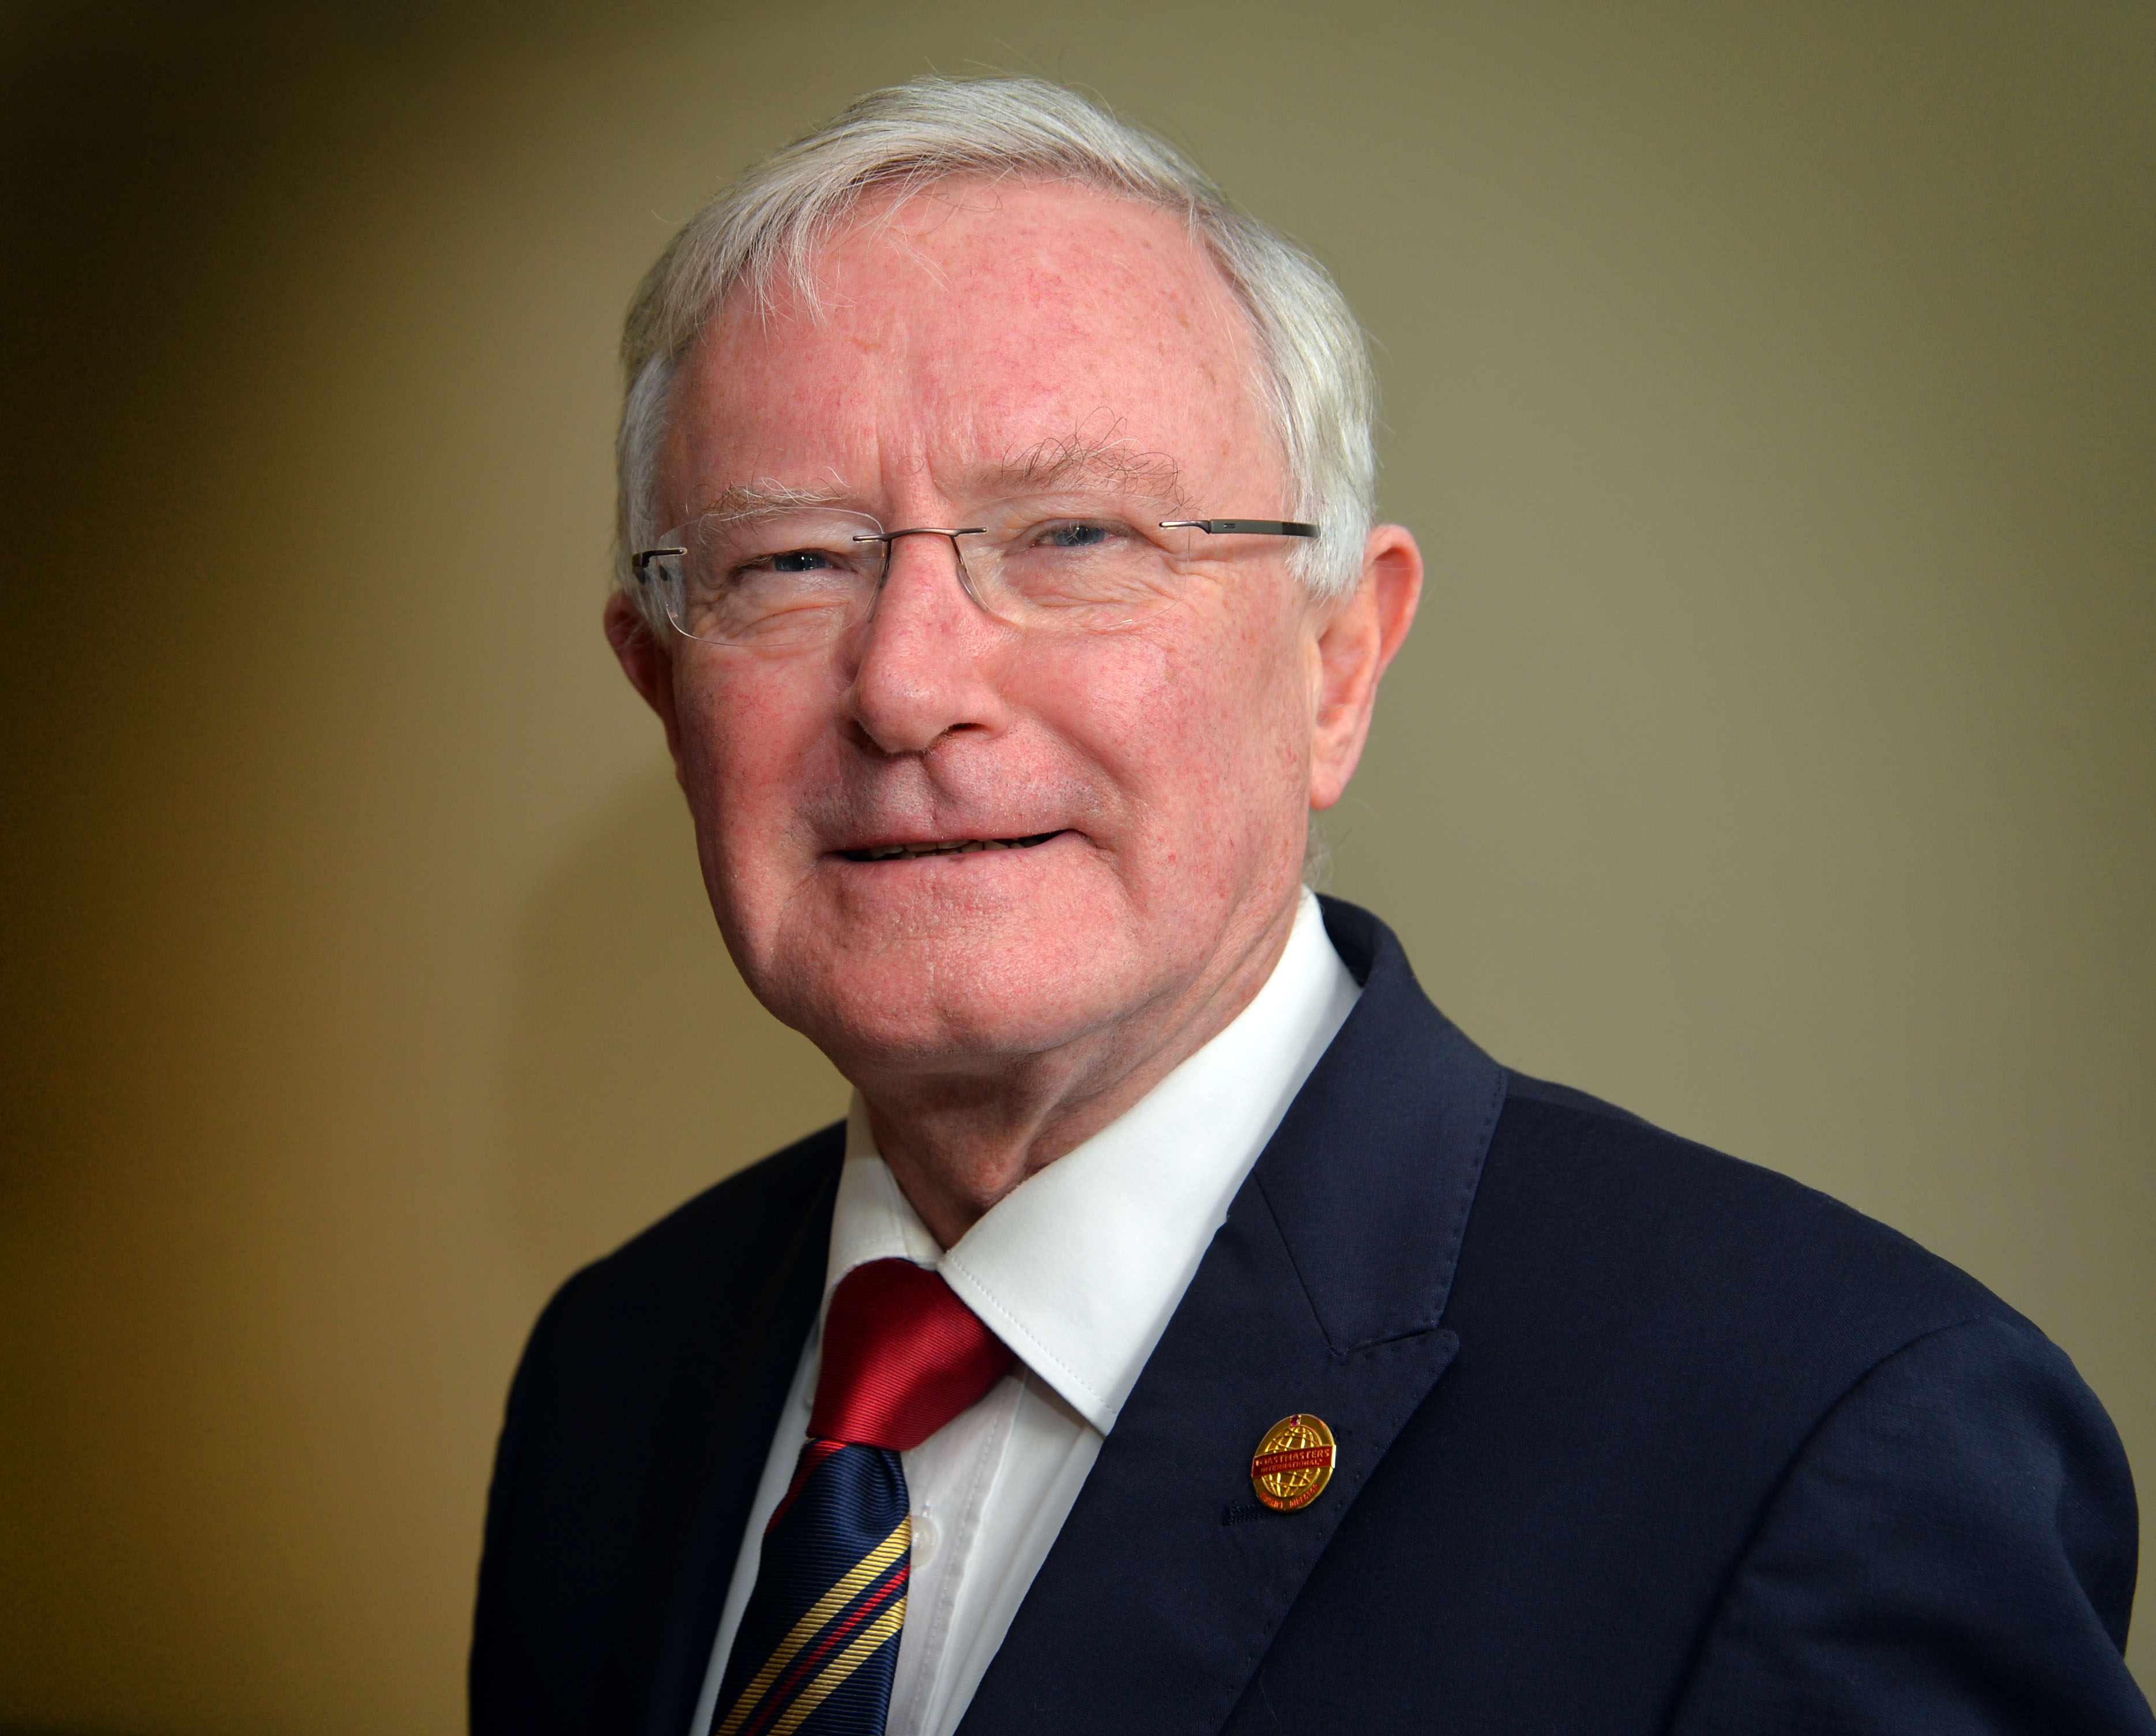 Toastmasters and Rotary join forces in Ireland to make a difference in the world